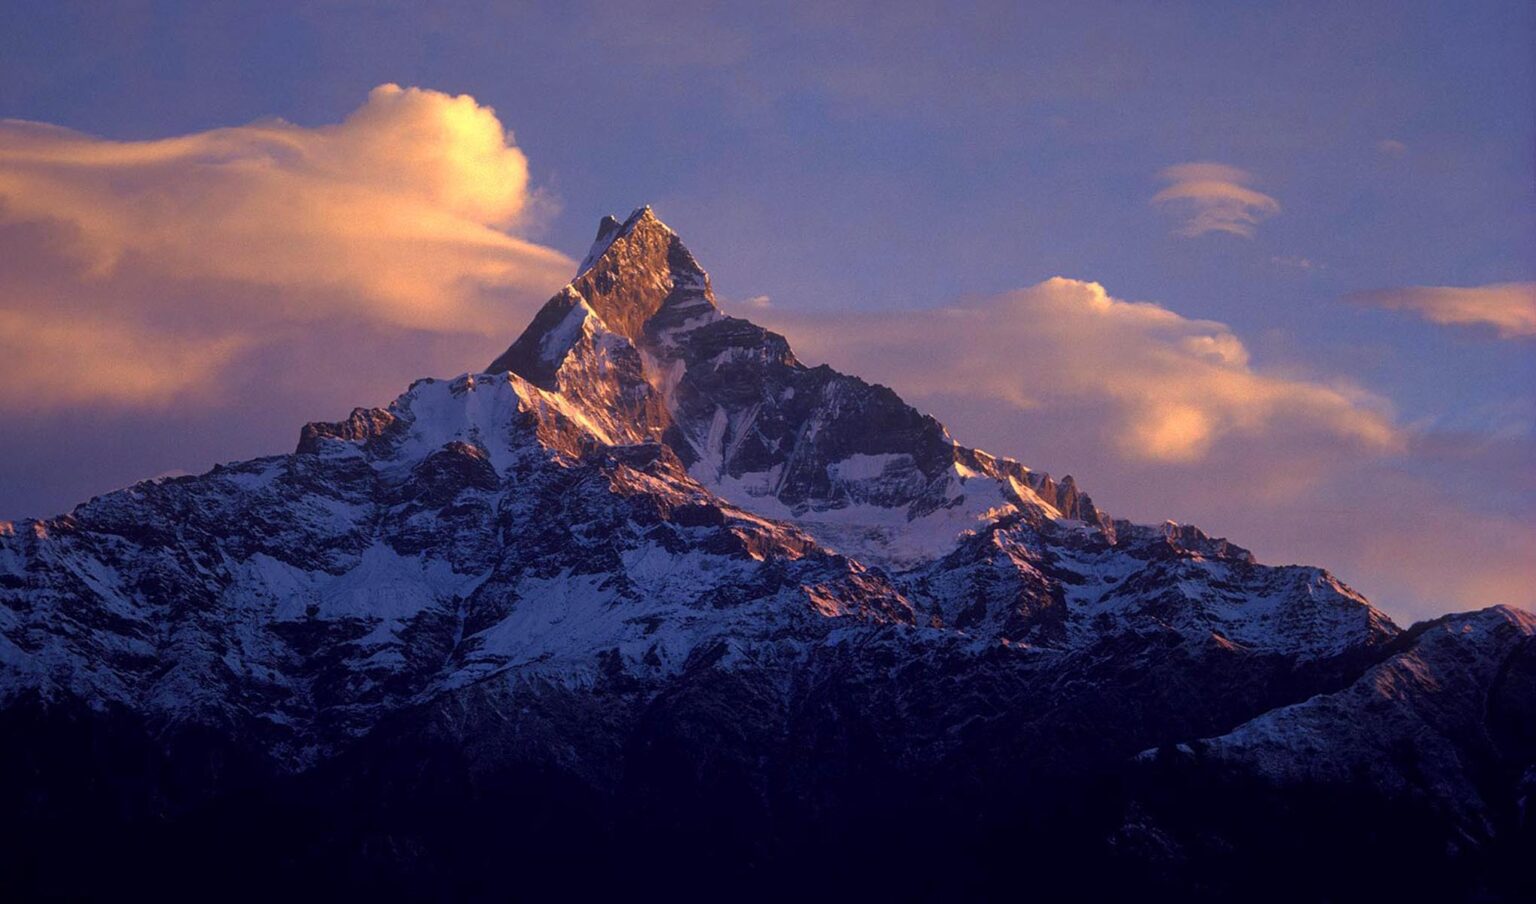 Himalayan SUNSET over holy MT. MACHAPUCHARE (Fish Tail) in CENTRAL NEPAL